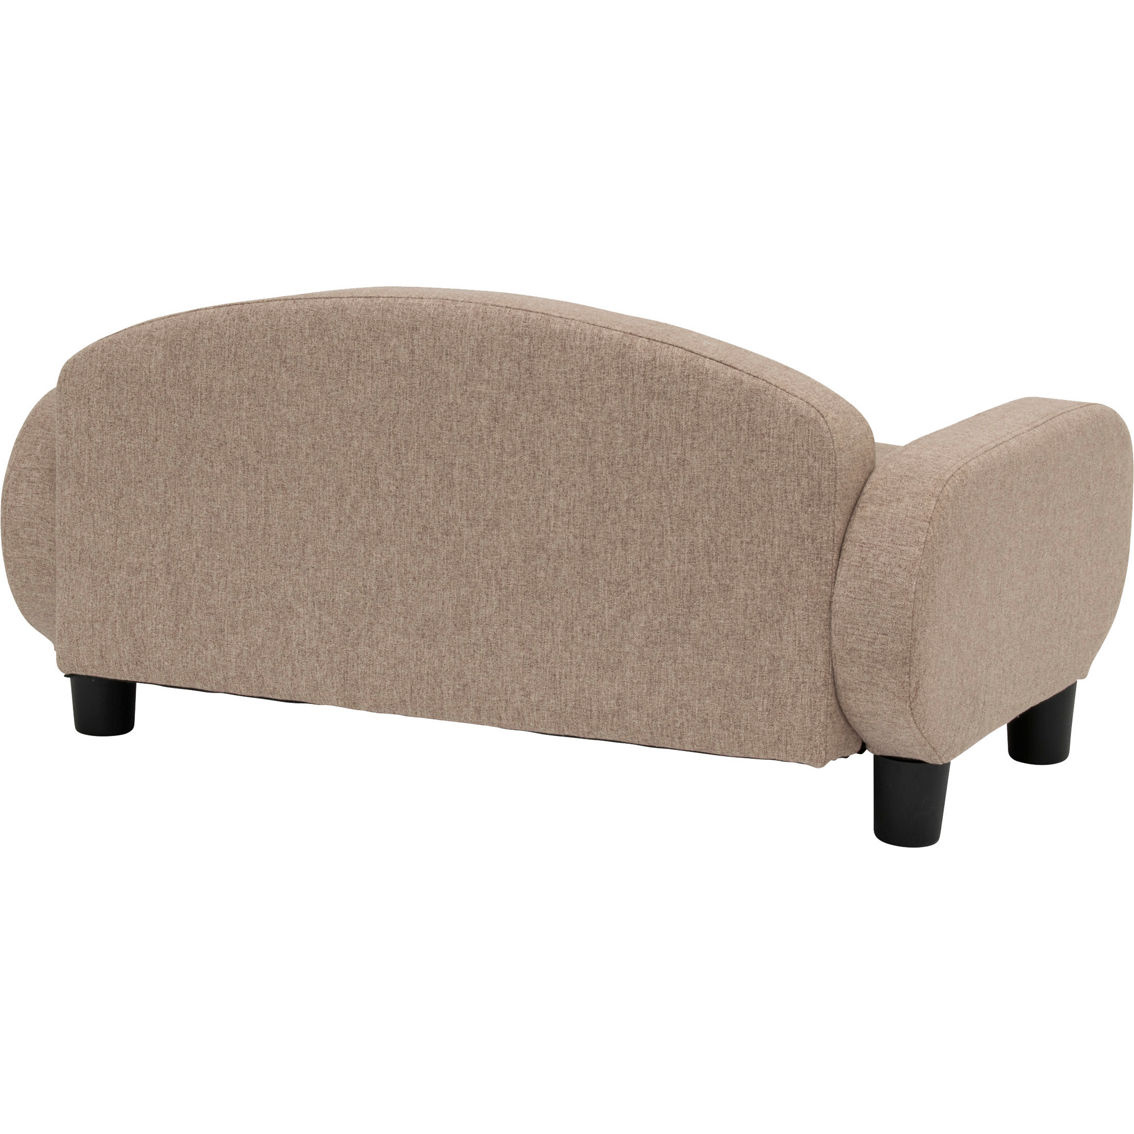 Studio Designs Paws and Purrs Pet Sofa Small - Image 3 of 9